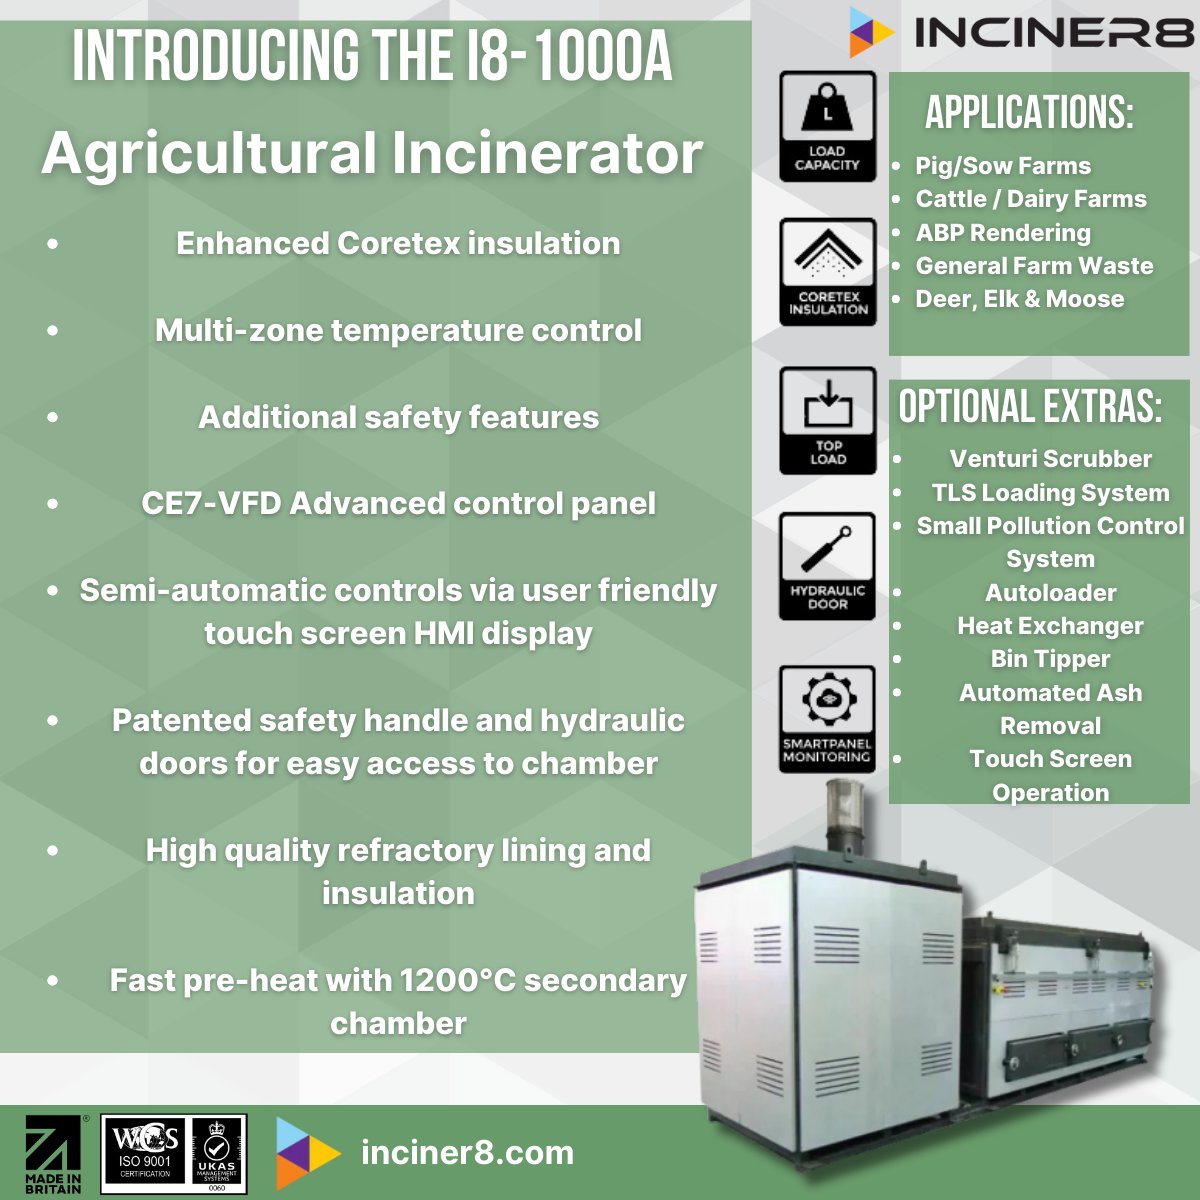 ✨Introducing the i8-1000A✨

The i8-1000A boasts unmatched burn rates and large batch sizes while maintaining incredibly low emissions. Perfect for farms, abattoirs, and veterinary practices, it's the ultimate solution for managing agricultural waste🐄
bit.ly/43Uj3RQ